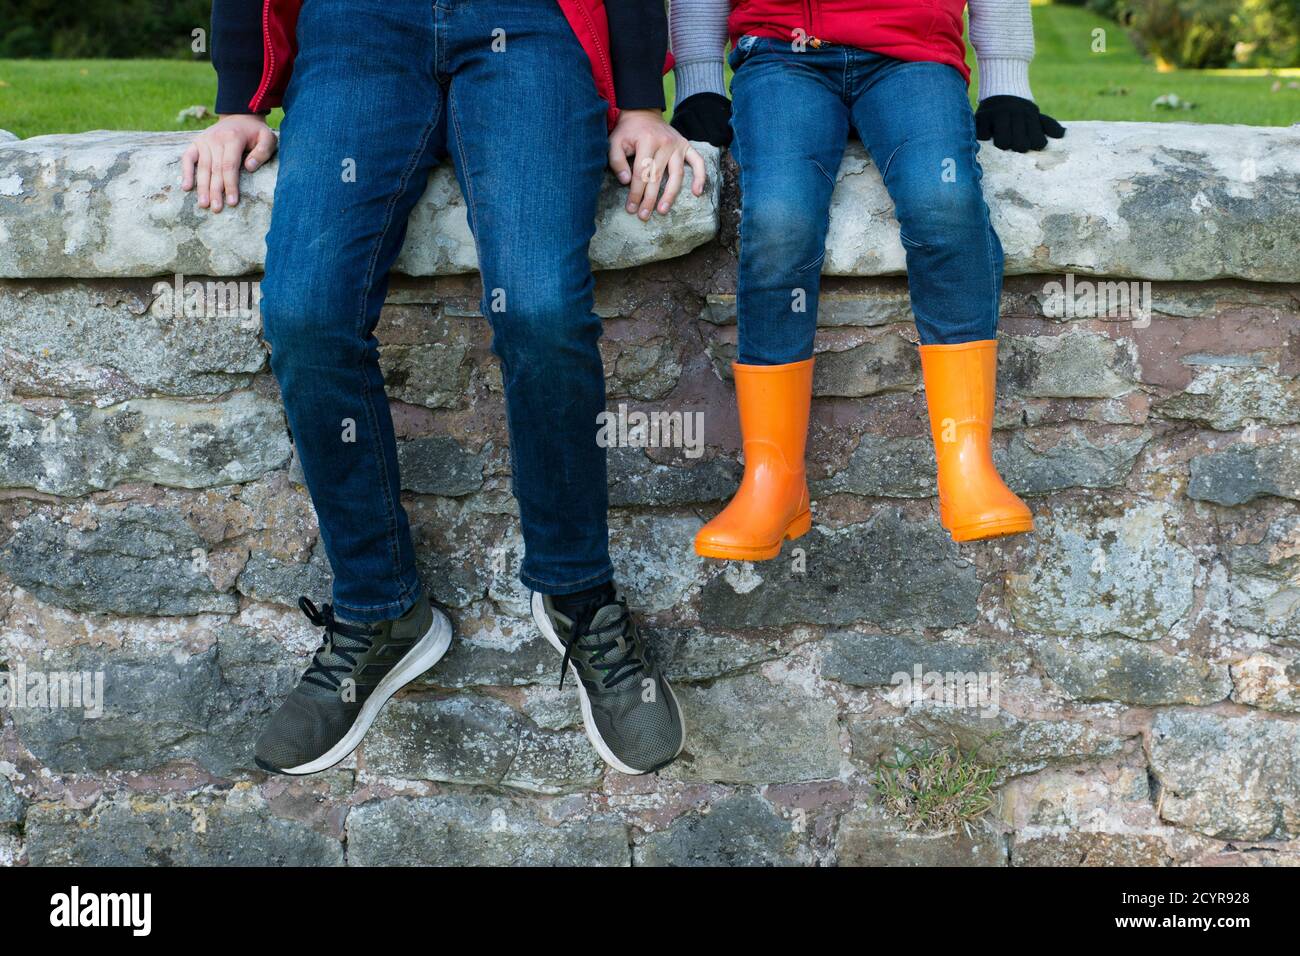 Welly Boots High Resolution Stock Photography and Images - Alamy